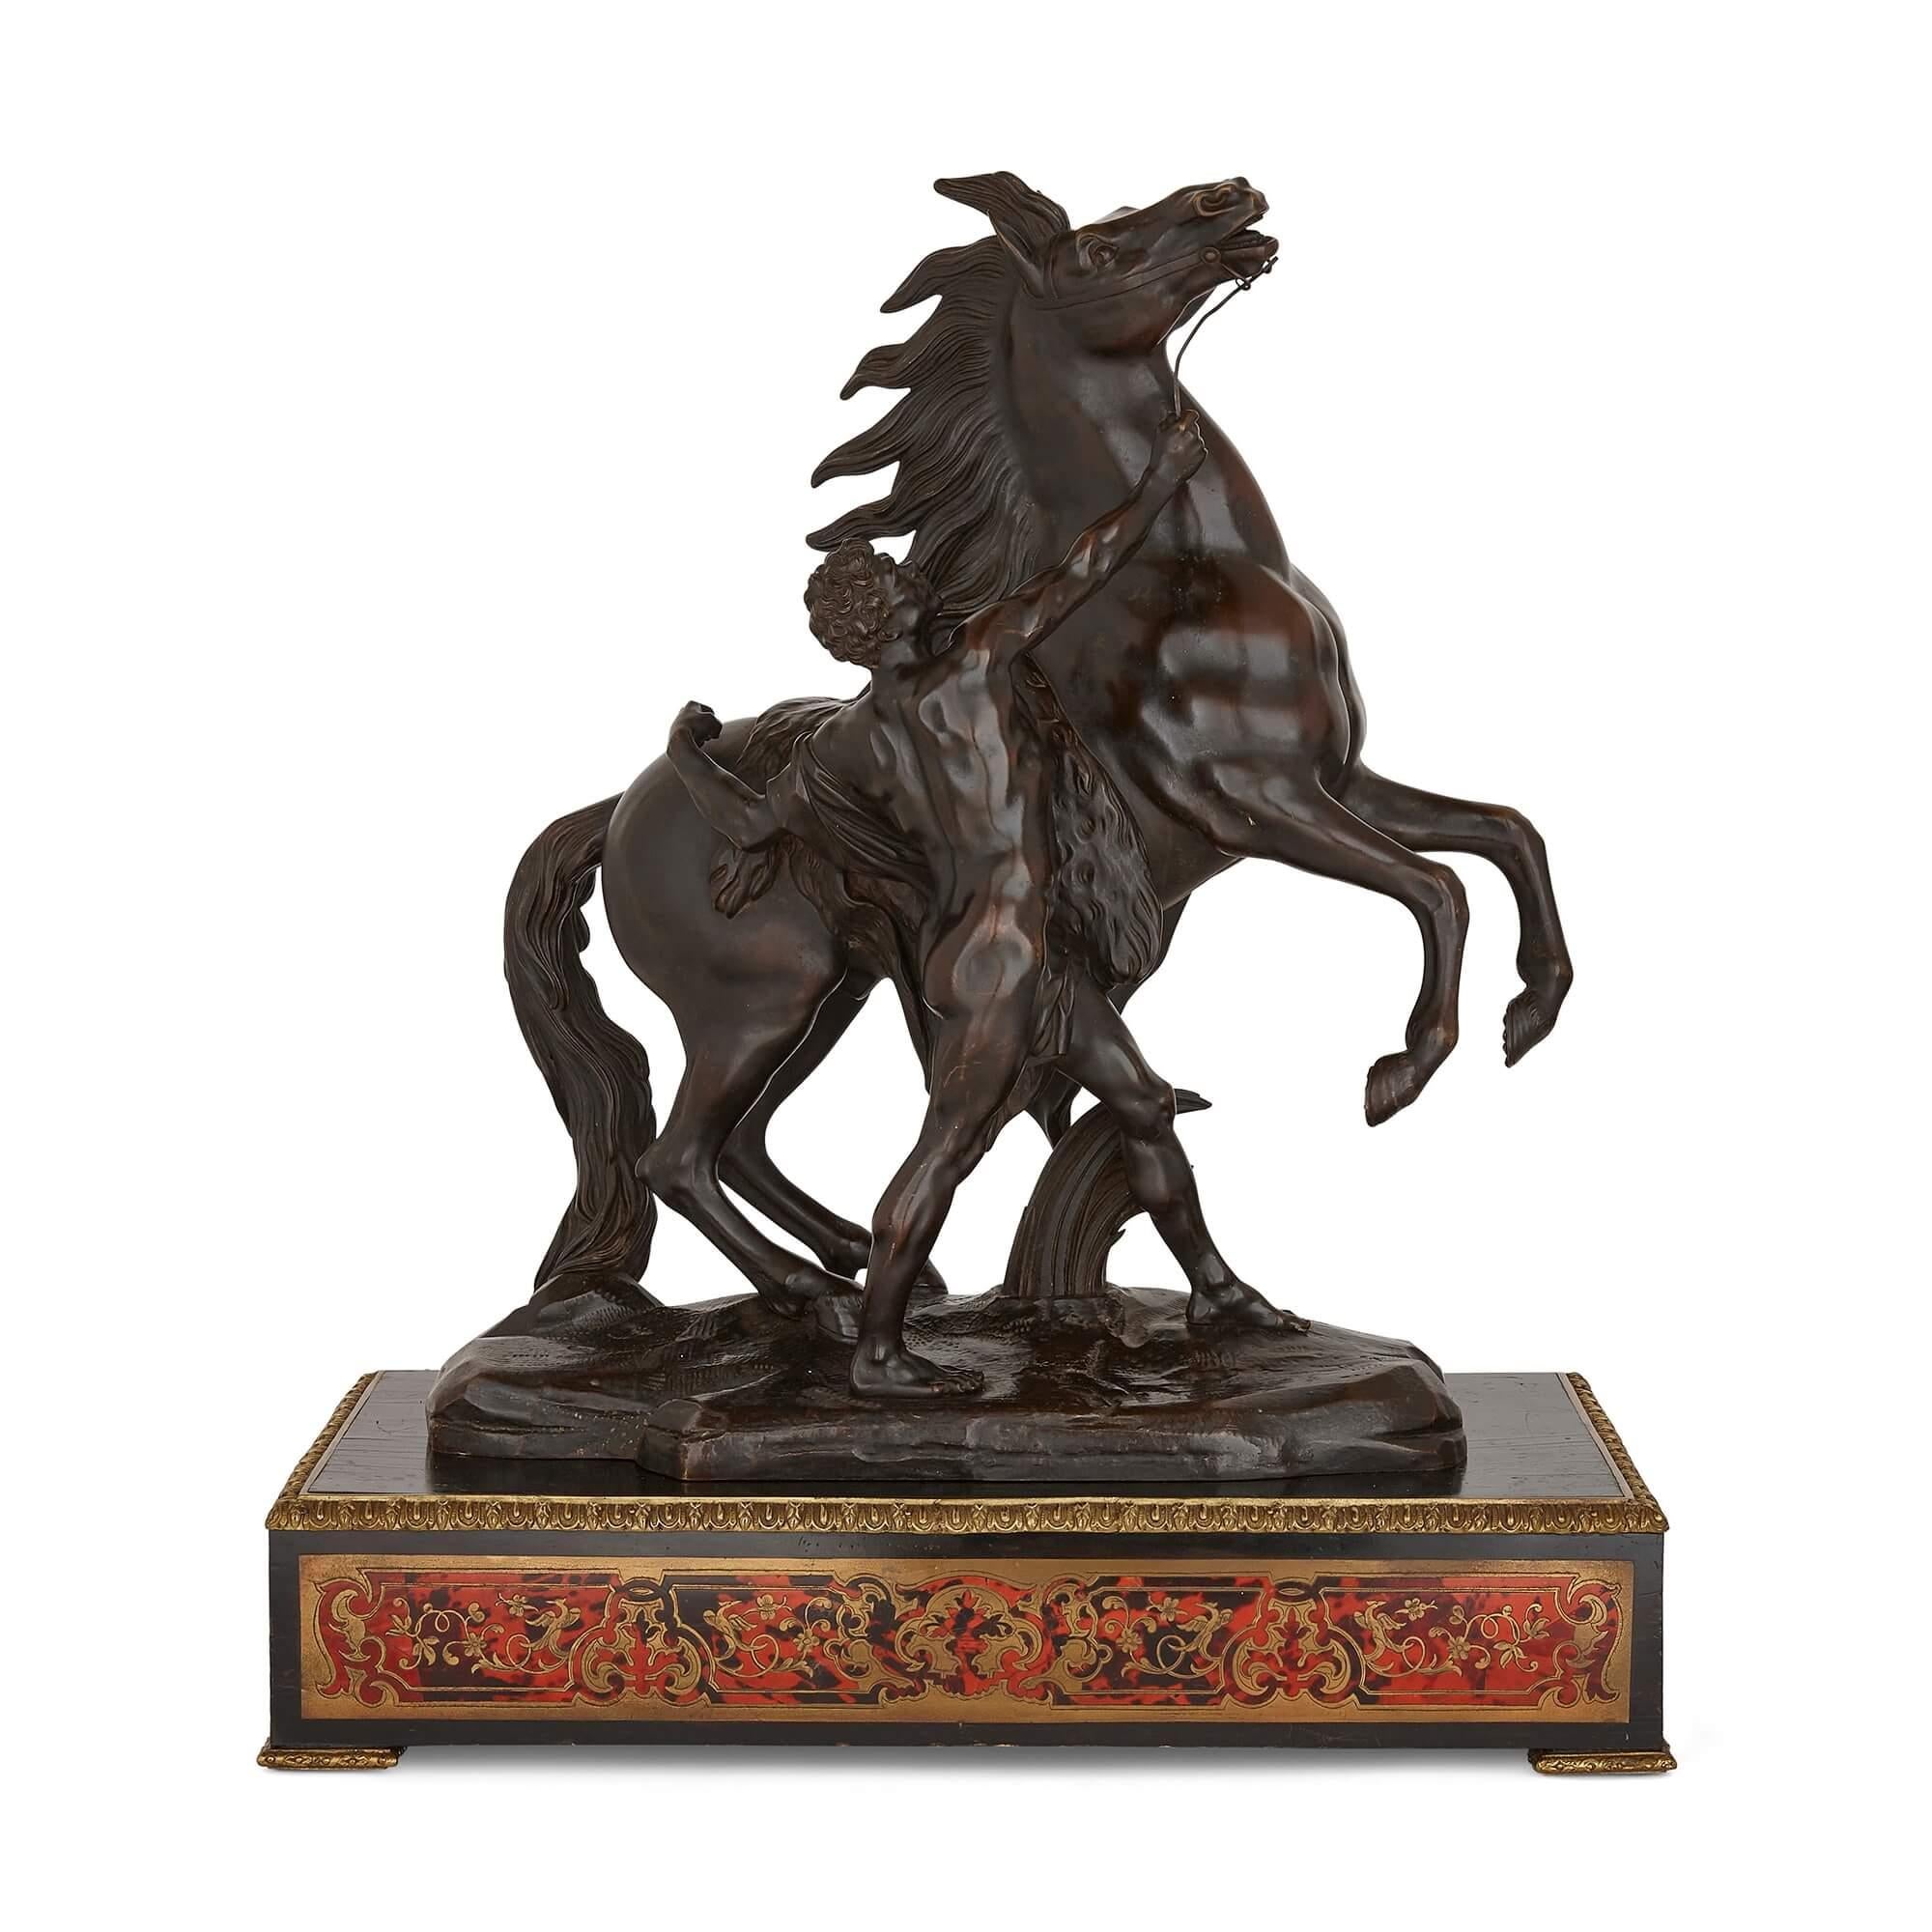 Pair of bronze Marly horses on Boulle style marquetry stands
French, late 19th century
Measures: Total height 73cm
Horses: Height 60cm, width 53cm, depth 23cm
Plinths: Height 13cm, width 63cm, depth 34cm

The bronzes in this pair are after